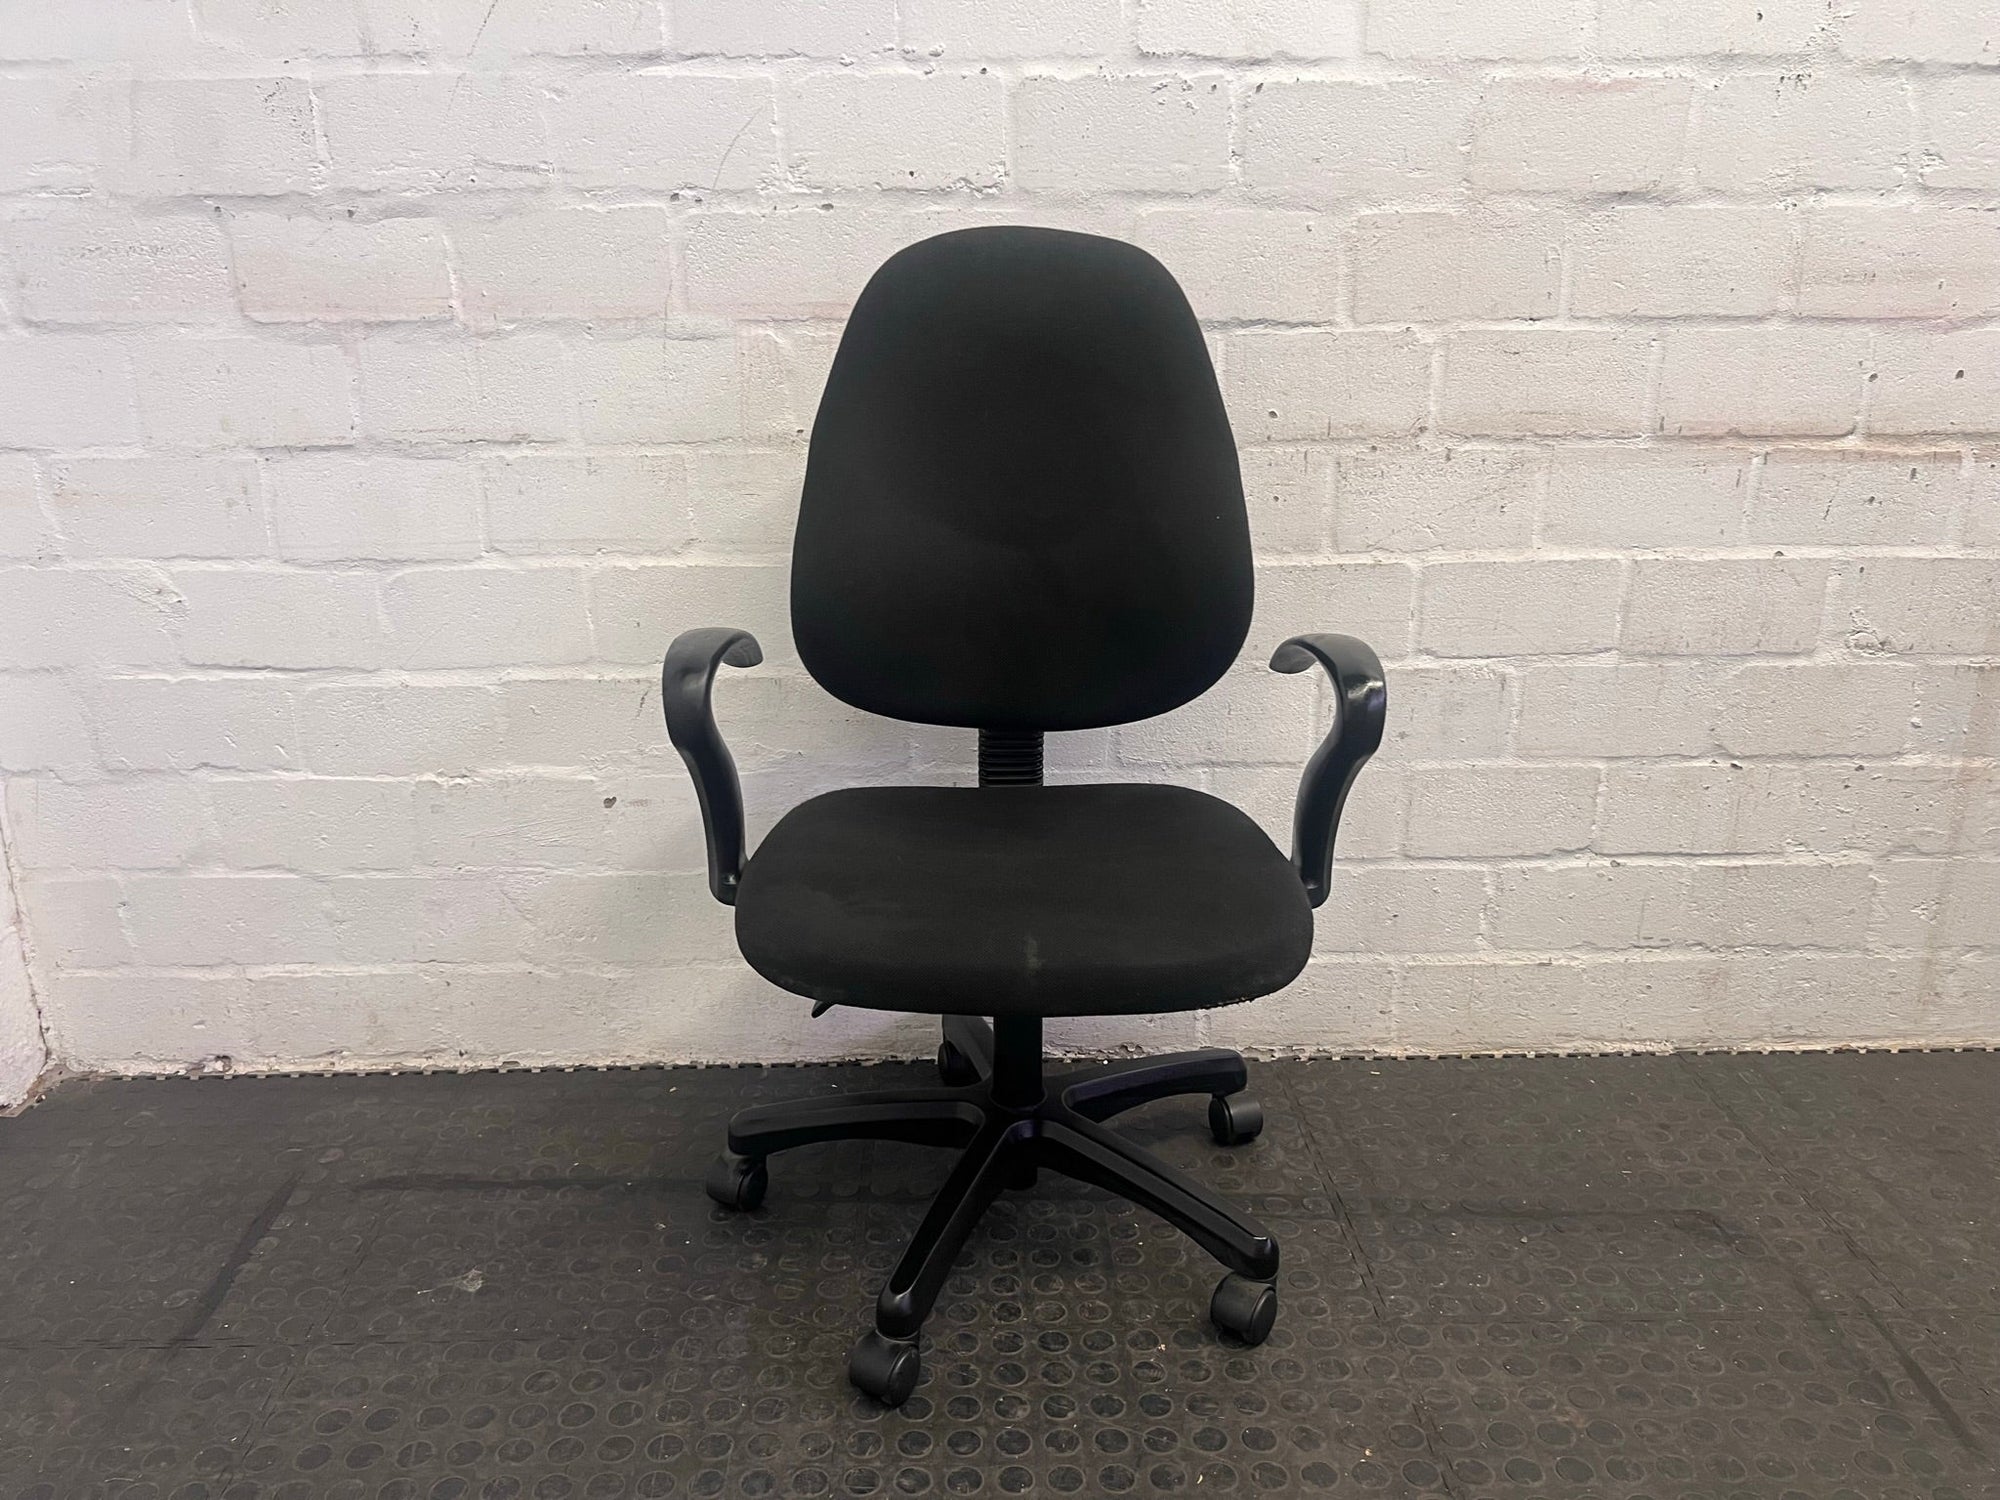 Black Mid-Back Office Chair on Wheels with Arm Rests